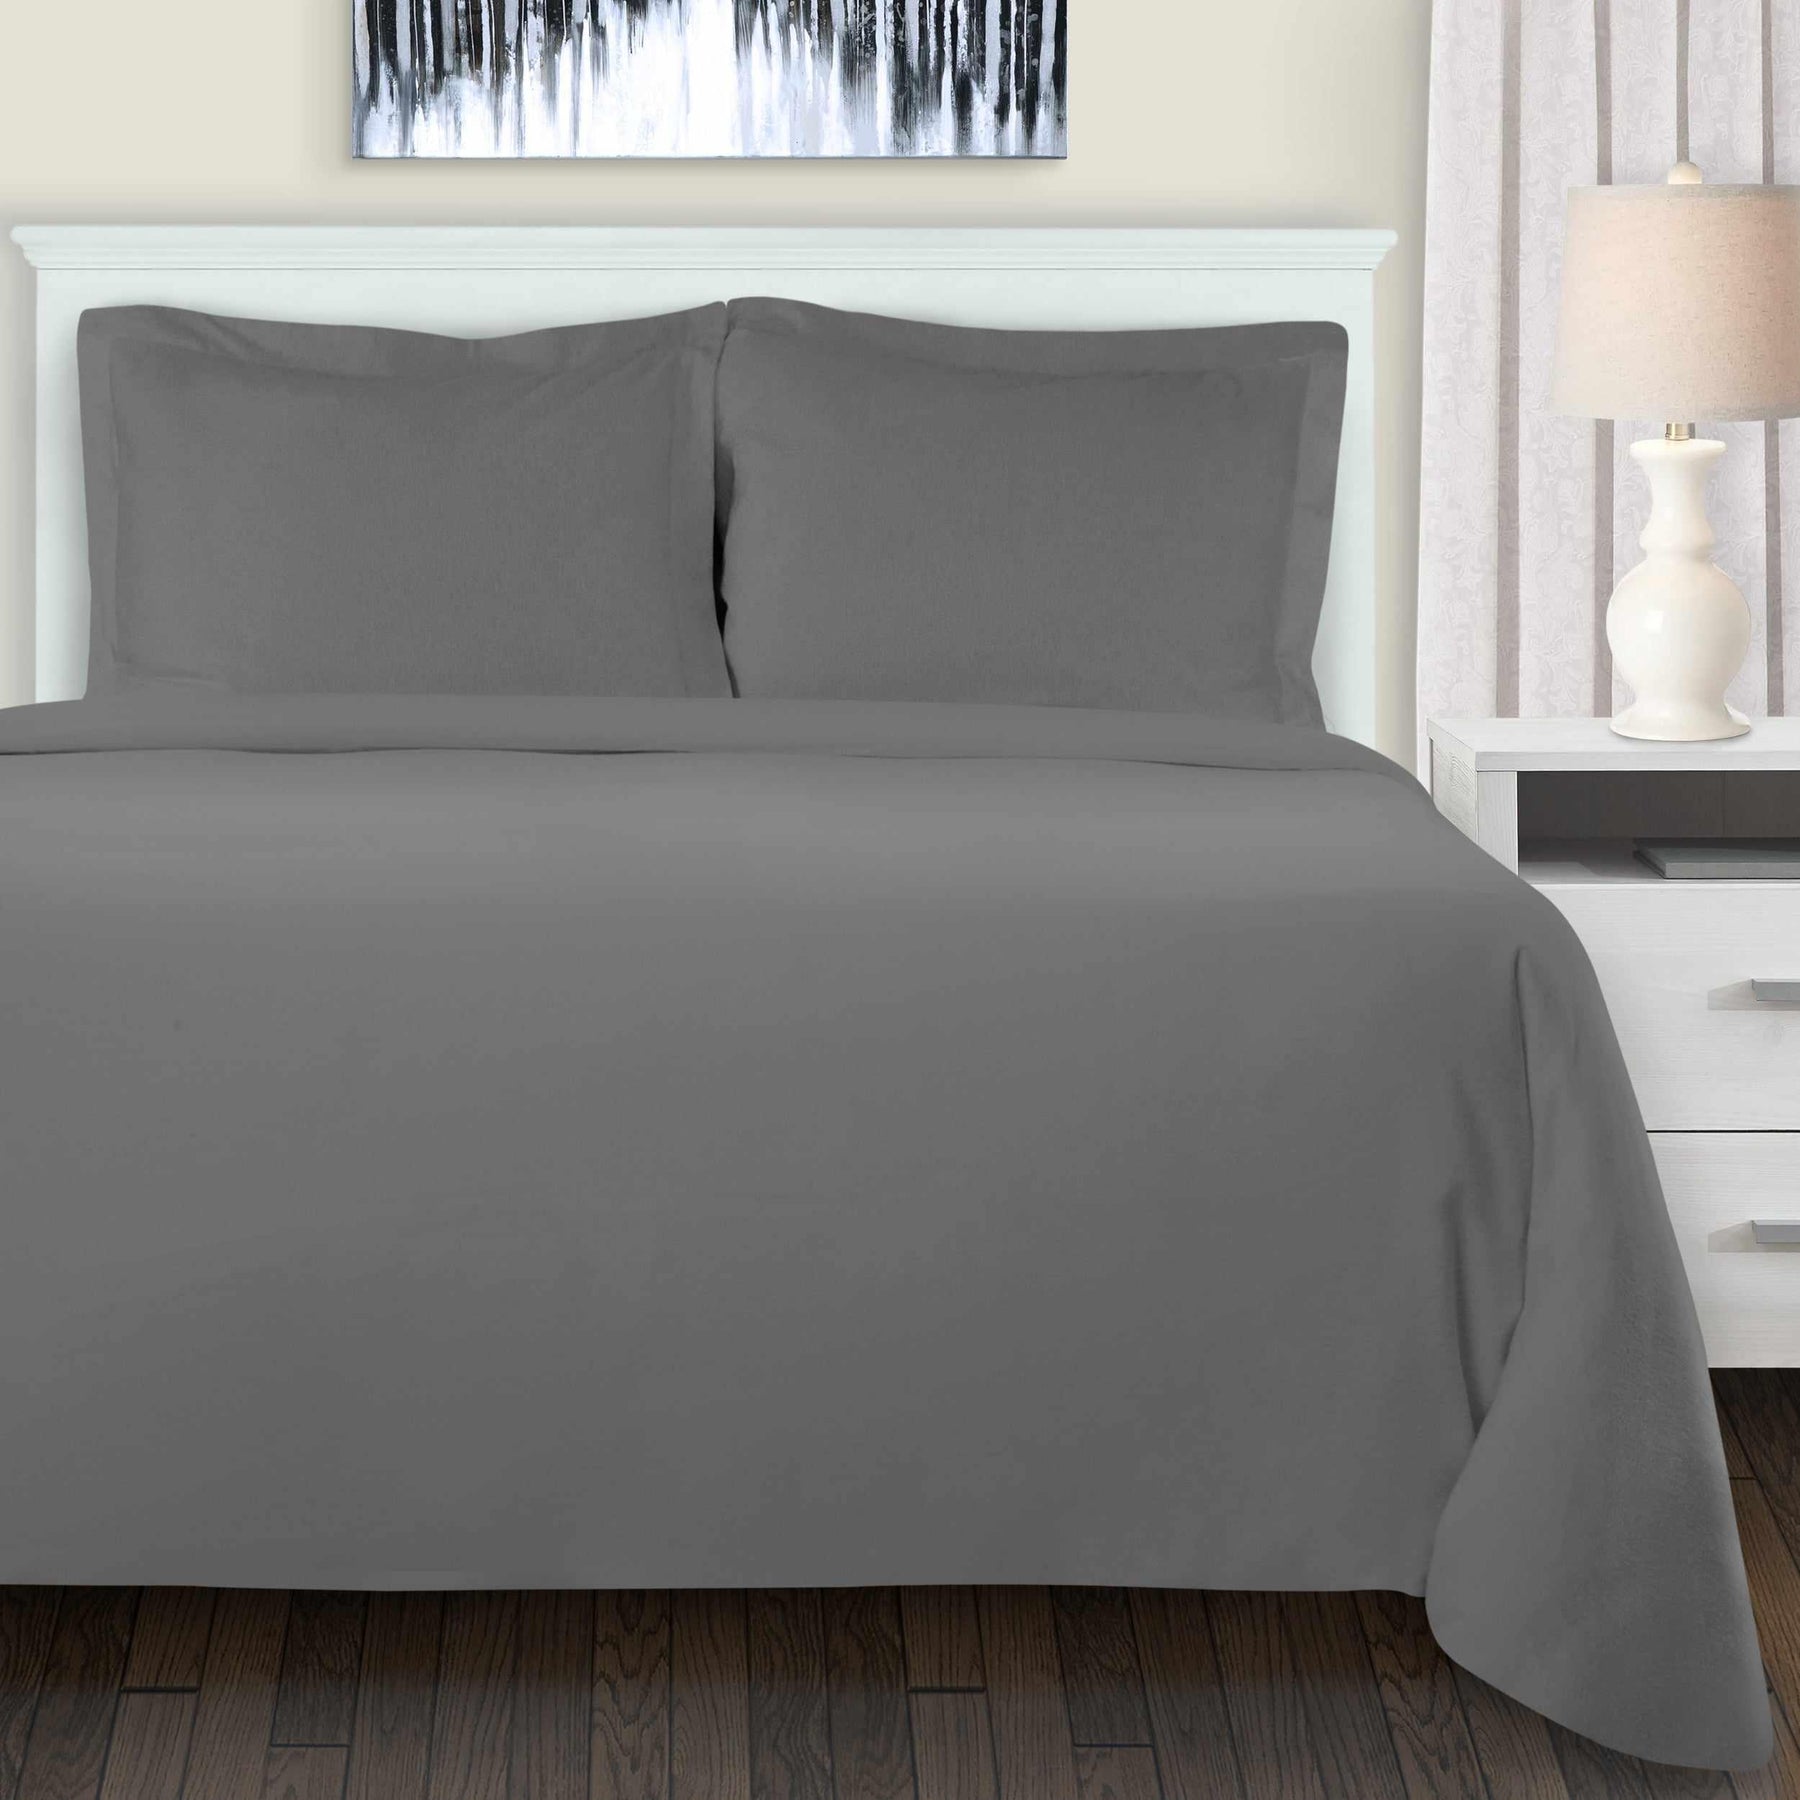 Superior Cotton Flannel Solid or Trellis Heavyweight and Breathable Duvet Cover Set with Button Closure - Grey